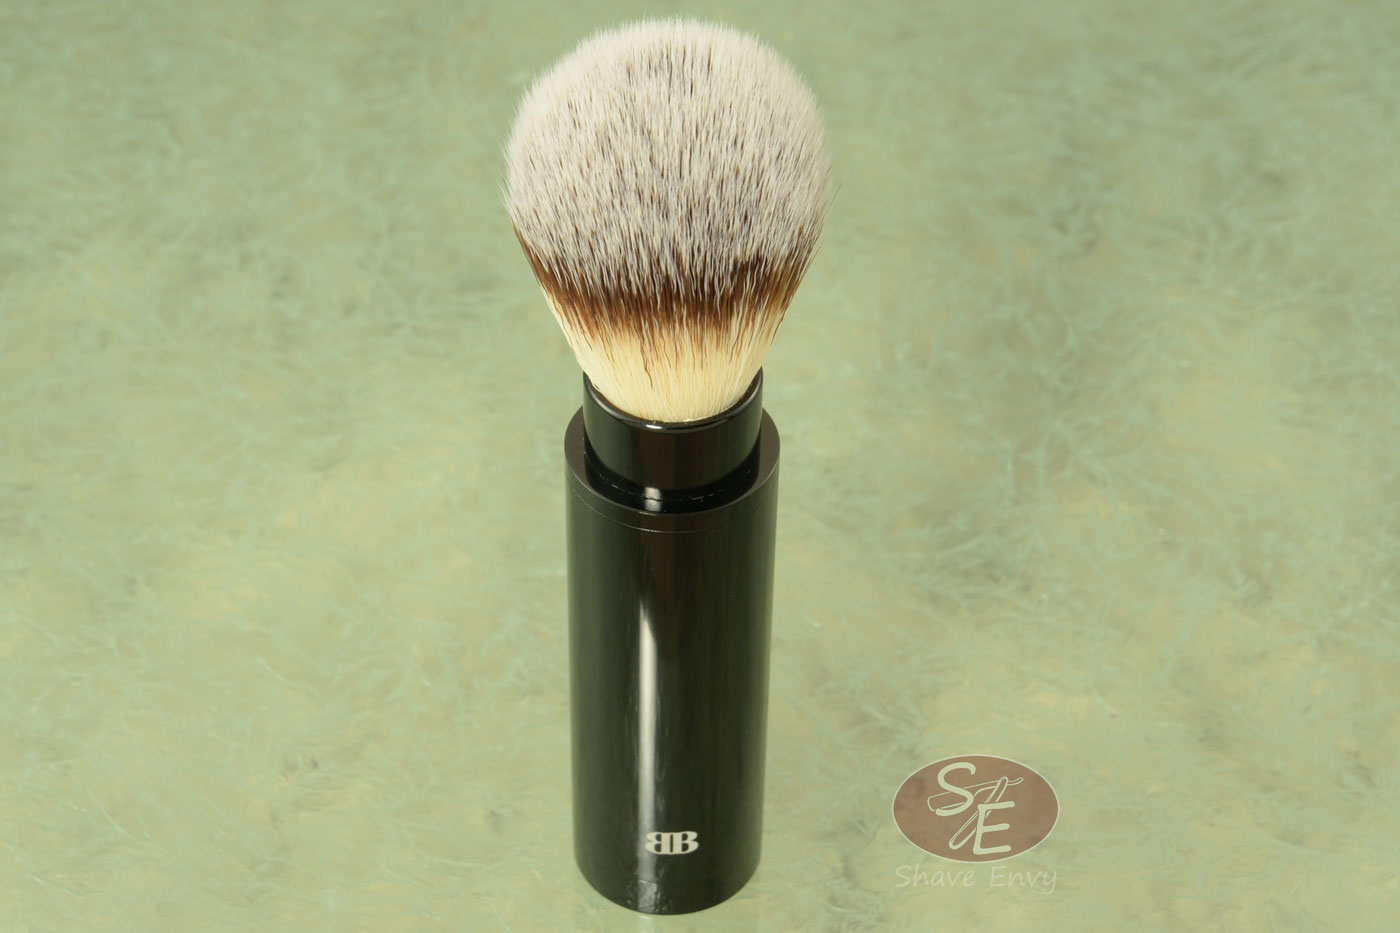 Aluminum Travel Brush with Synthetic Bristles